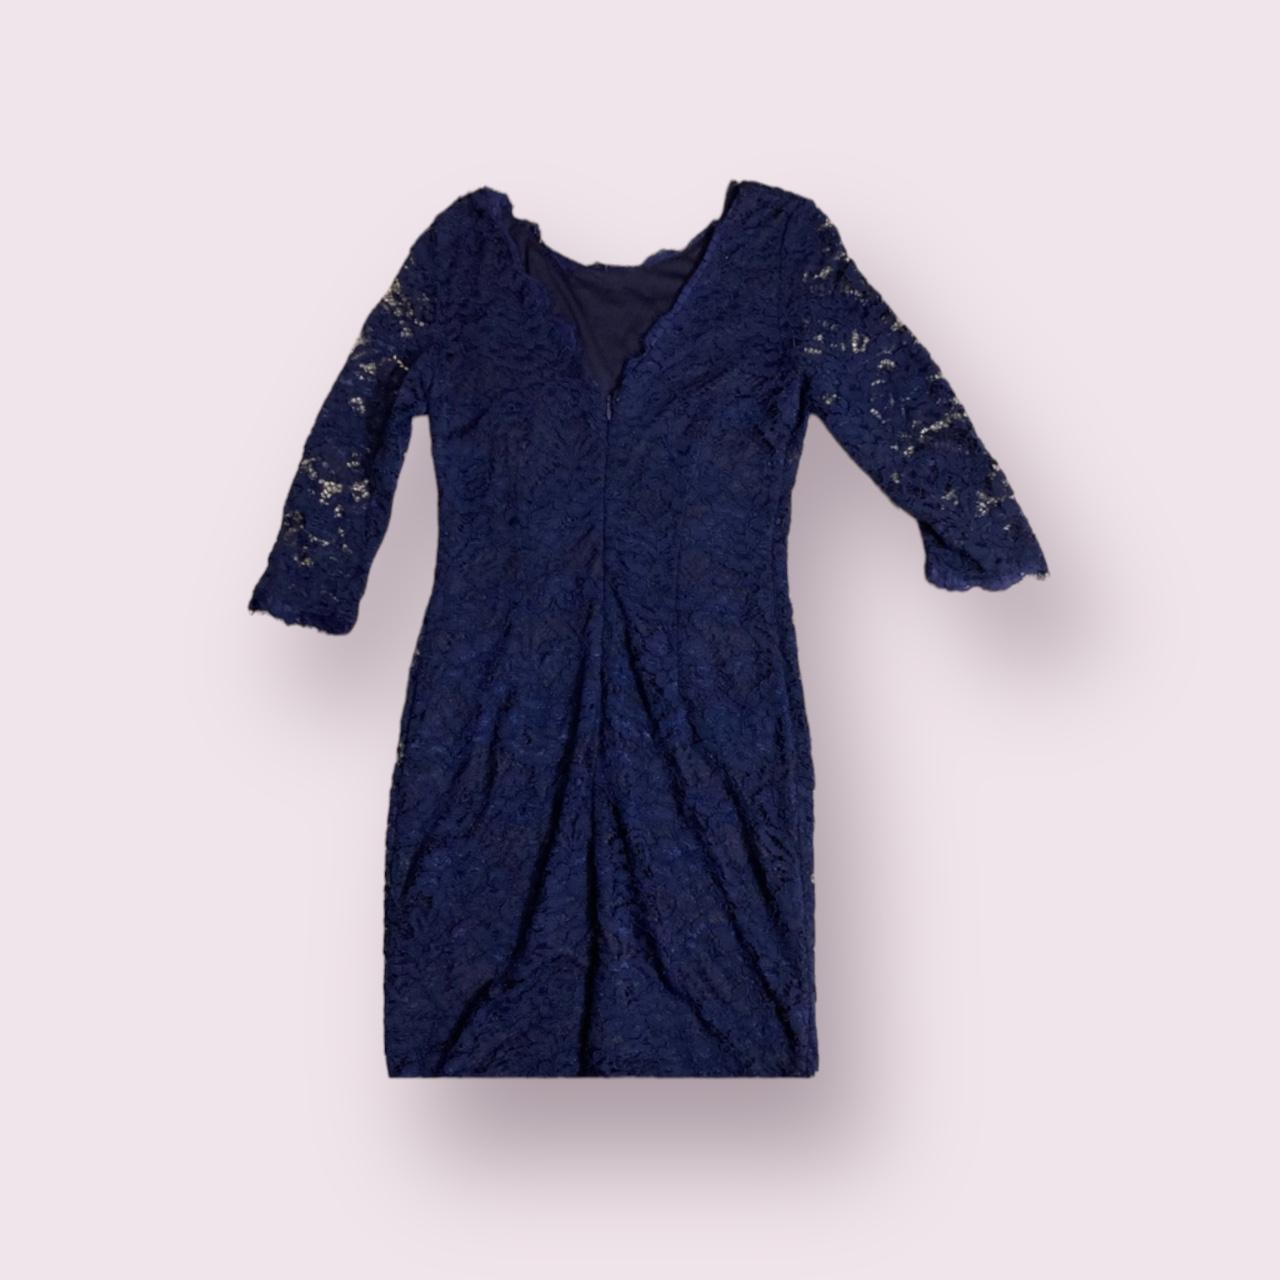 Product Image 1 - Long sleeved dress 
Size small